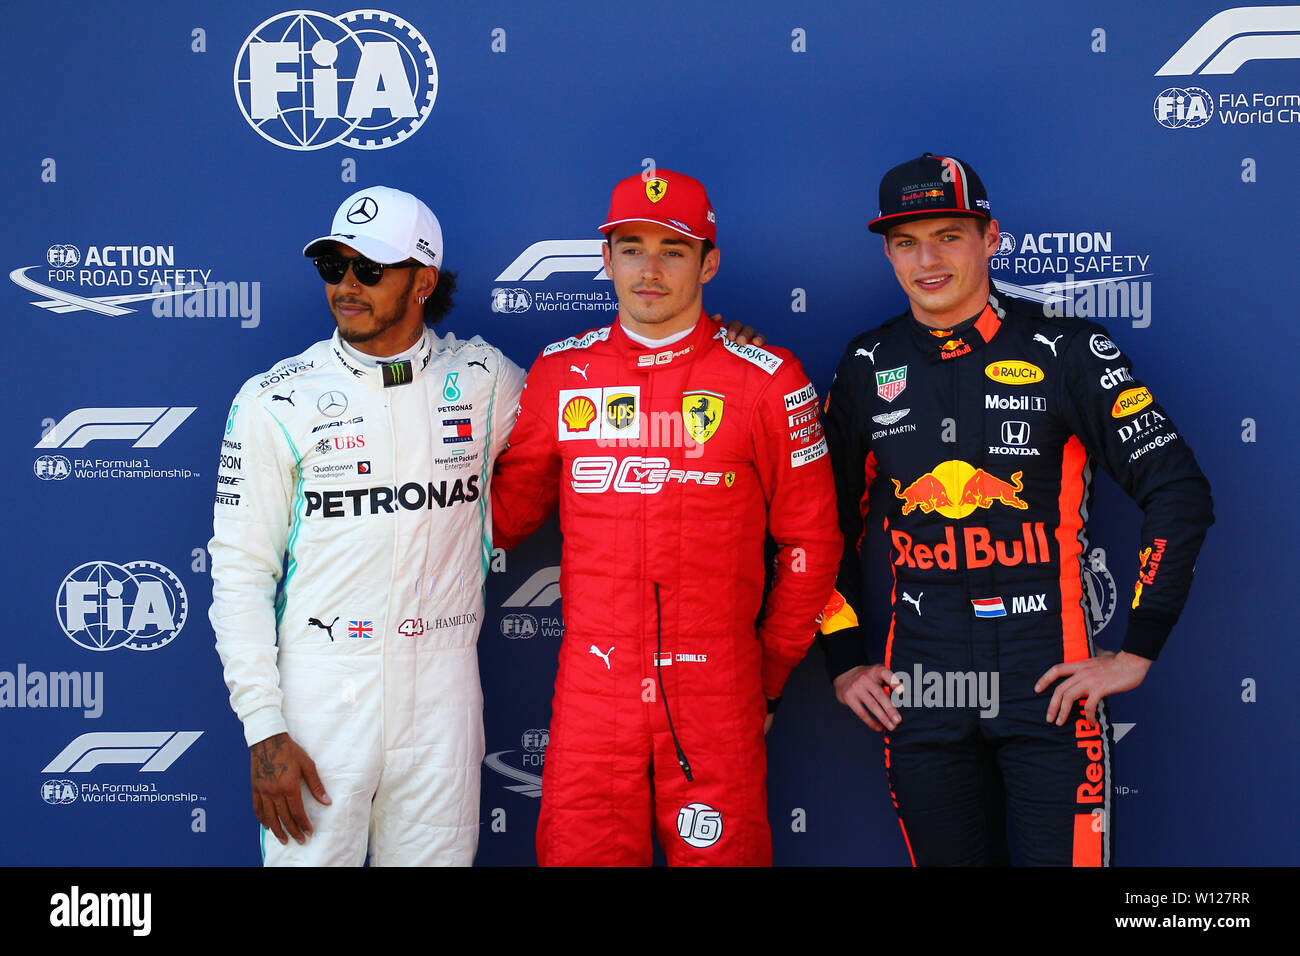 Spielberg Austria 29th June 2019 Top Three Qualifiers Charles Leclerc Of Monaco And Ferrari Lewis Hamilton Of Great Britain And Mercedes Gp And Max Verstappen Of Netherlands And Red Bull Racing Celebrate